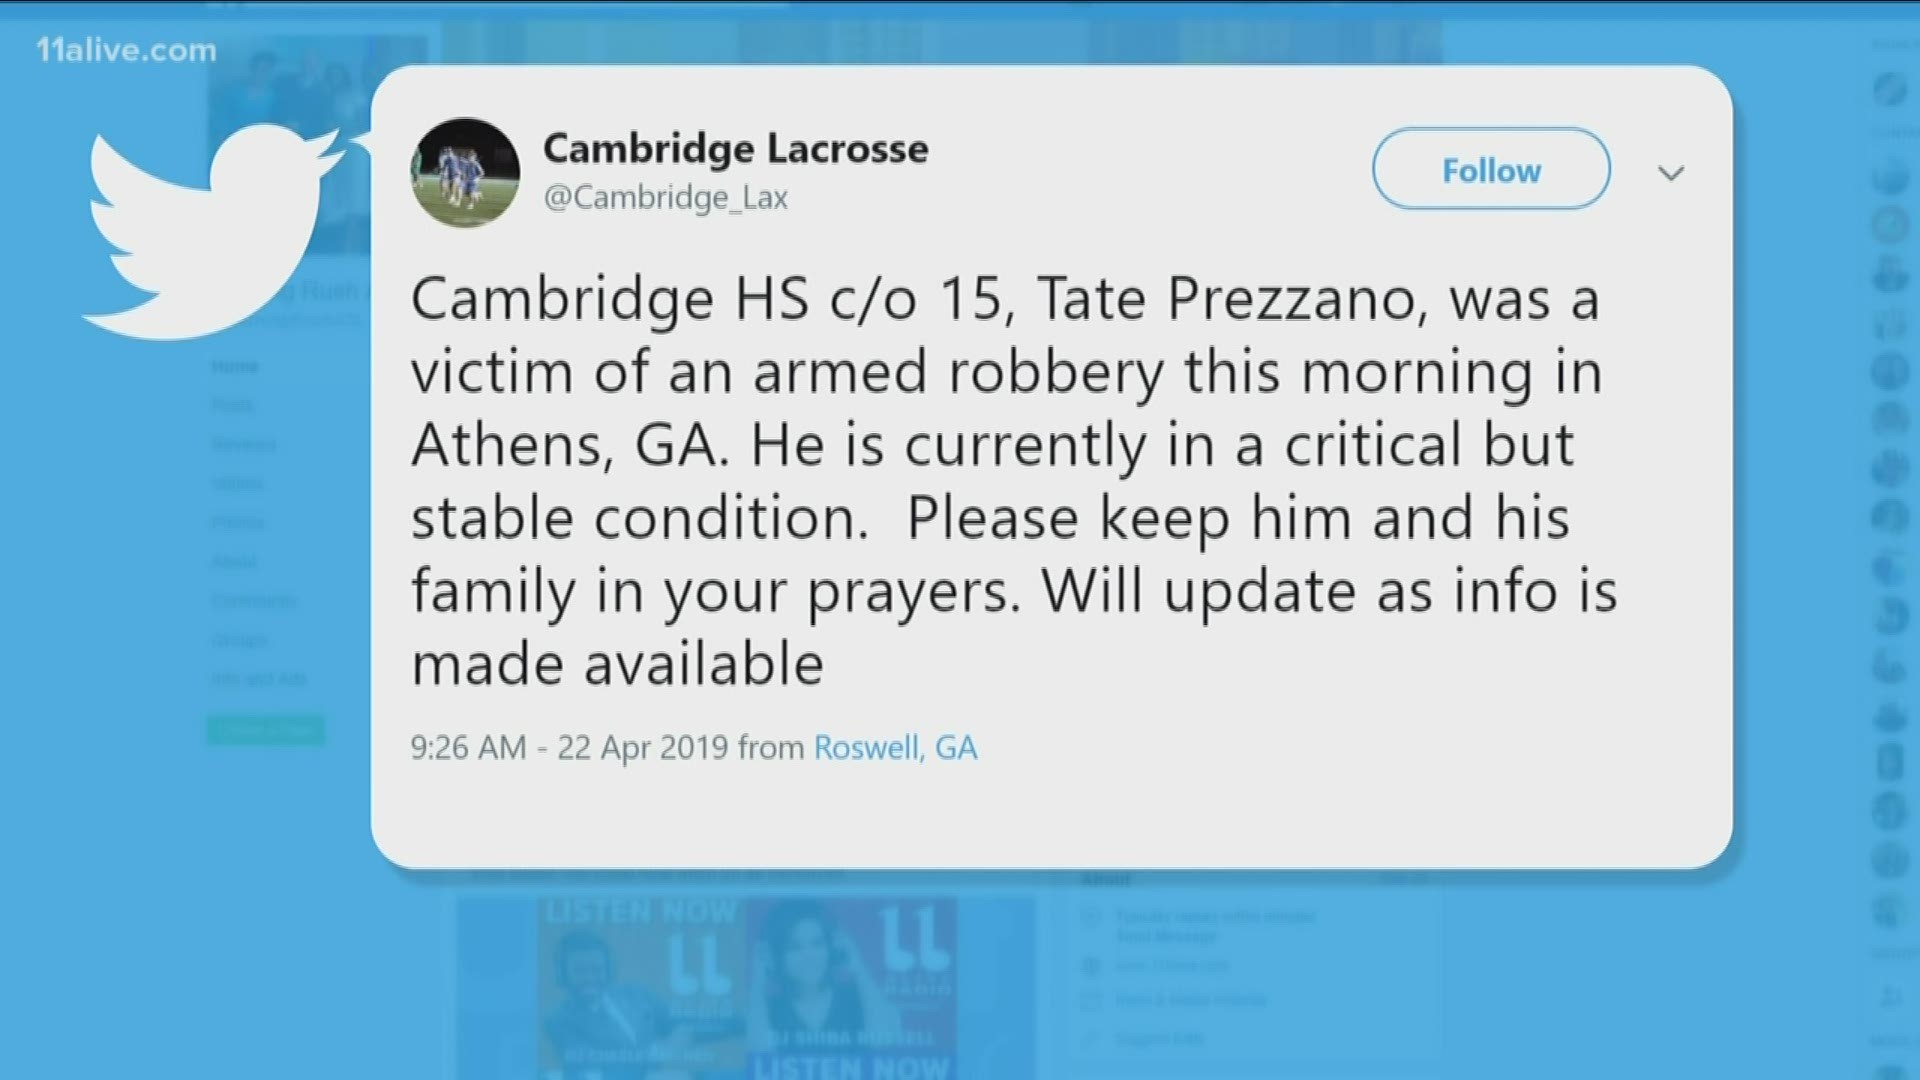 The student who was injured graduated from Cambridge High